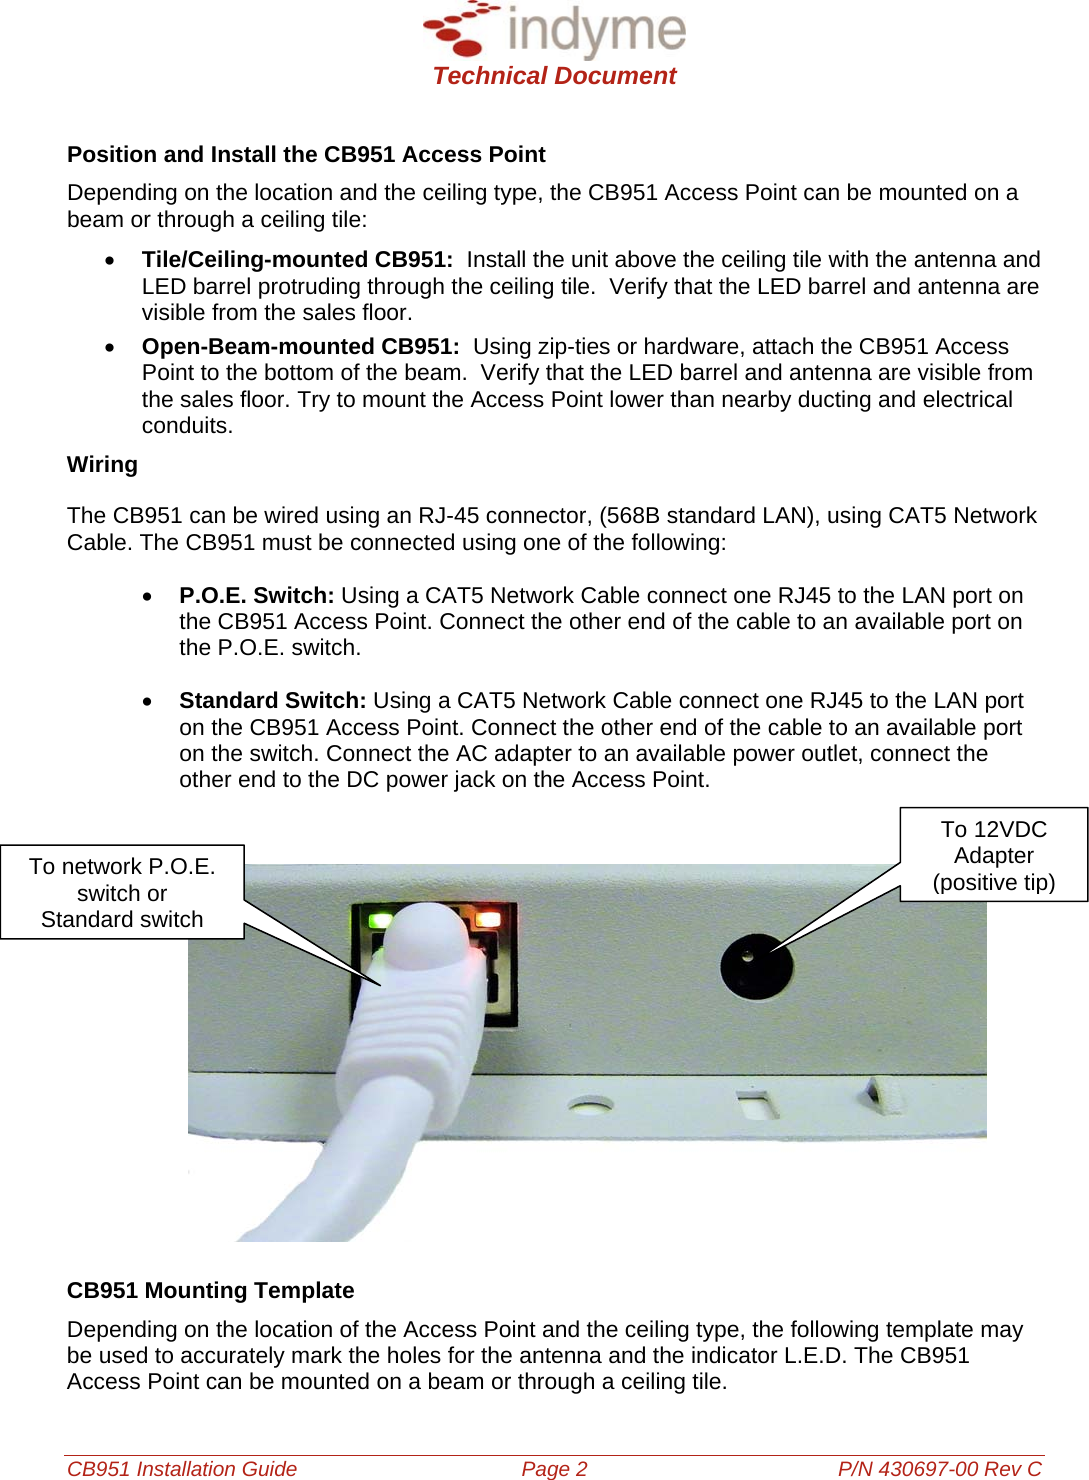  Technical Document  CB951 Installation Guide Page 2 P/N 430697-00 Rev C Position and Install the CB951 Access Point Depending on the location and the ceiling type, the CB951 Access Point can be mounted on a beam or through a ceiling tile: • Tile/Ceiling-mounted CB951:  Install the unit above the ceiling tile with the antenna and LED barrel protruding through the ceiling tile.  Verify that the LED barrel and antenna are visible from the sales floor.  • Open-Beam-mounted CB951:  Using zip-ties or hardware, attach the CB951 Access Point to the bottom of the beam.  Verify that the LED barrel and antenna are visible from the sales floor. Try to mount the Access Point lower than nearby ducting and electrical conduits. Wiring The CB951 can be wired using an RJ-45 connector, (568B standard LAN), using CAT5 Network Cable. The CB951 must be connected using one of the following: • P.O.E. Switch: Using a CAT5 Network Cable connect one RJ45 to the LAN port on the CB951 Access Point. Connect the other end of the cable to an available port on the P.O.E. switch.  • Standard Switch: Using a CAT5 Network Cable connect one RJ45 to the LAN port on the CB951 Access Point. Connect the other end of the cable to an available port on the switch. Connect the AC adapter to an available power outlet, connect the other end to the DC power jack on the Access Point. To 12VDC Adapter (positive tip)       To network P.O.E.  switch or Standard switch          CB951 Mounting Template Depending on the location of the Access Point and the ceiling type, the following template may be used to accurately mark the holes for the antenna and the indicator L.E.D. The CB951 Access Point can be mounted on a beam or through a ceiling tile. 